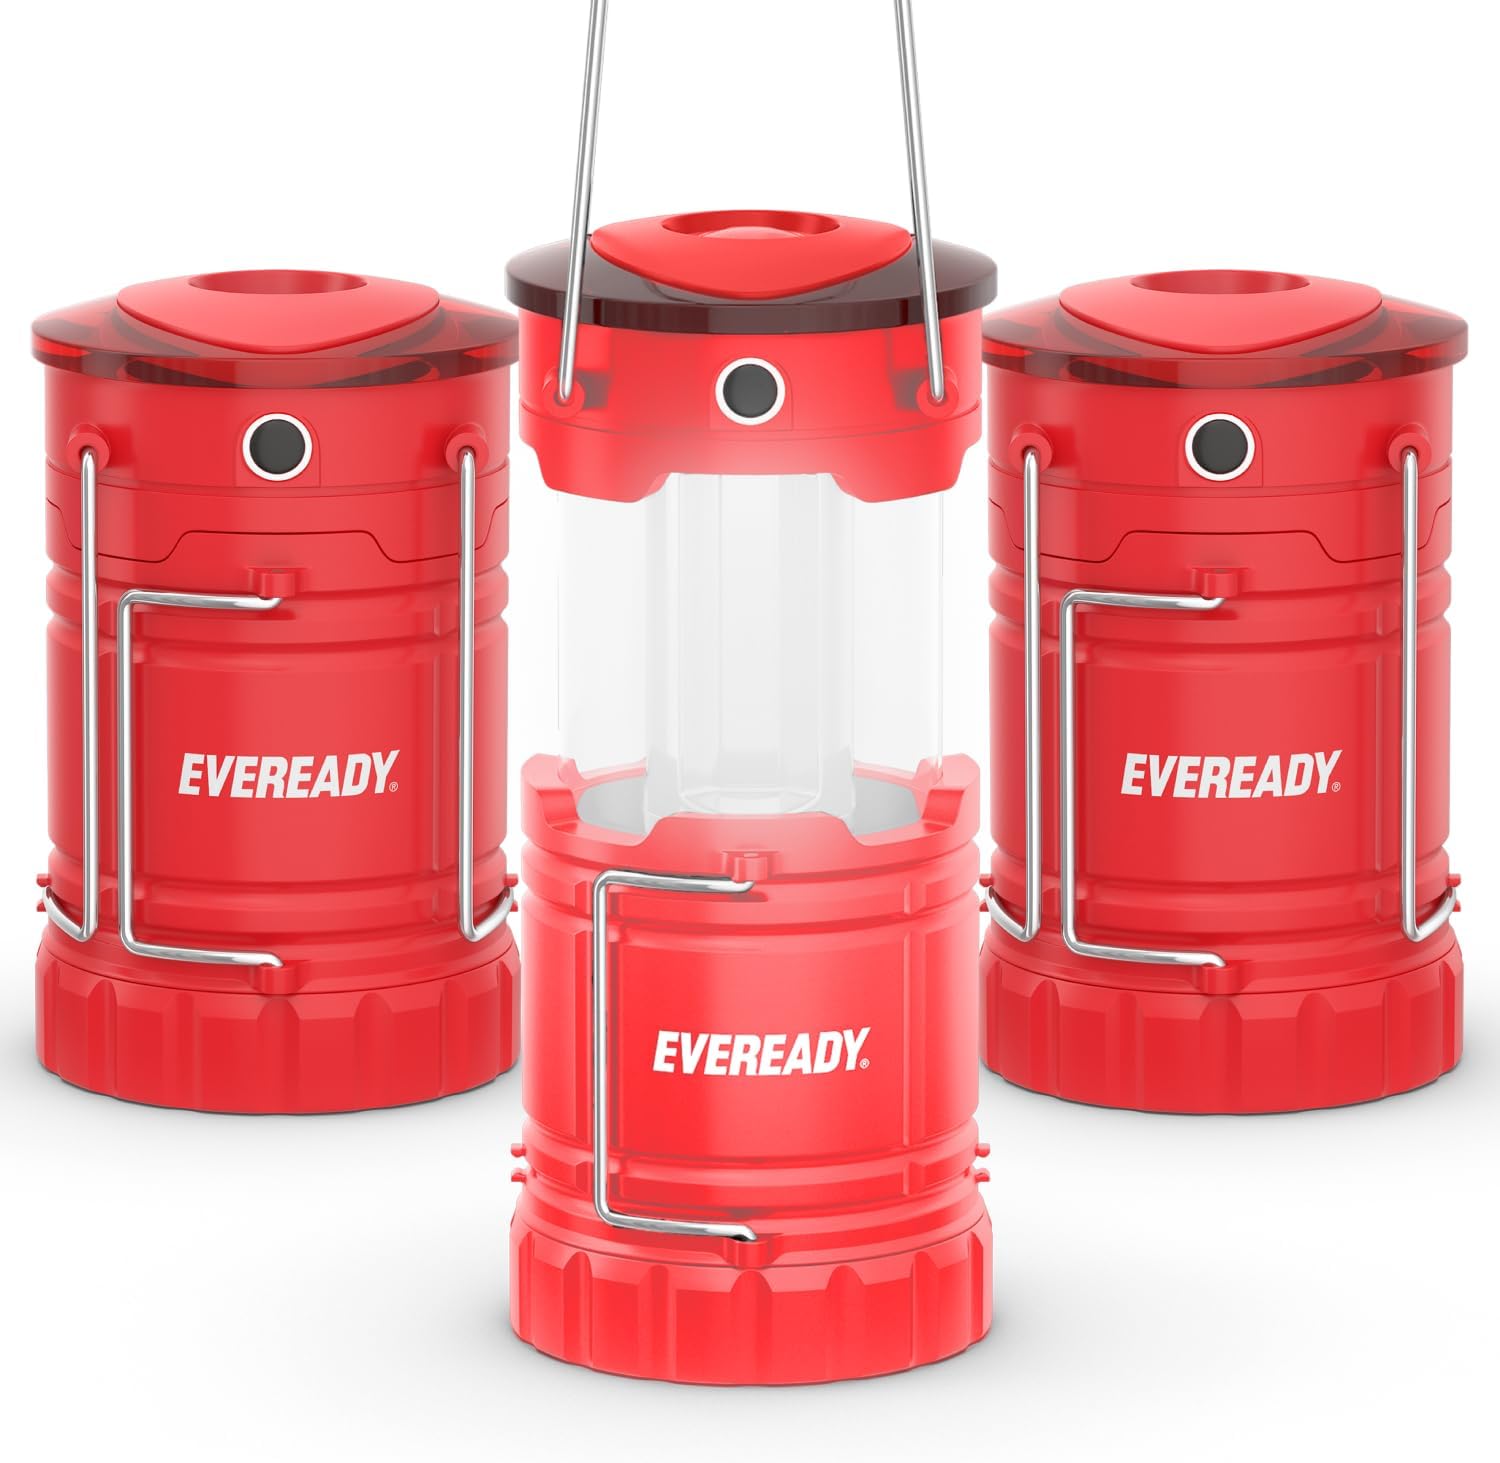 3-Pack Eveready 360 PRO LED Battery Powered Camping Lanterns $12.75 ($4.25 Each) + Free Shipping w/ Prime or on $35+